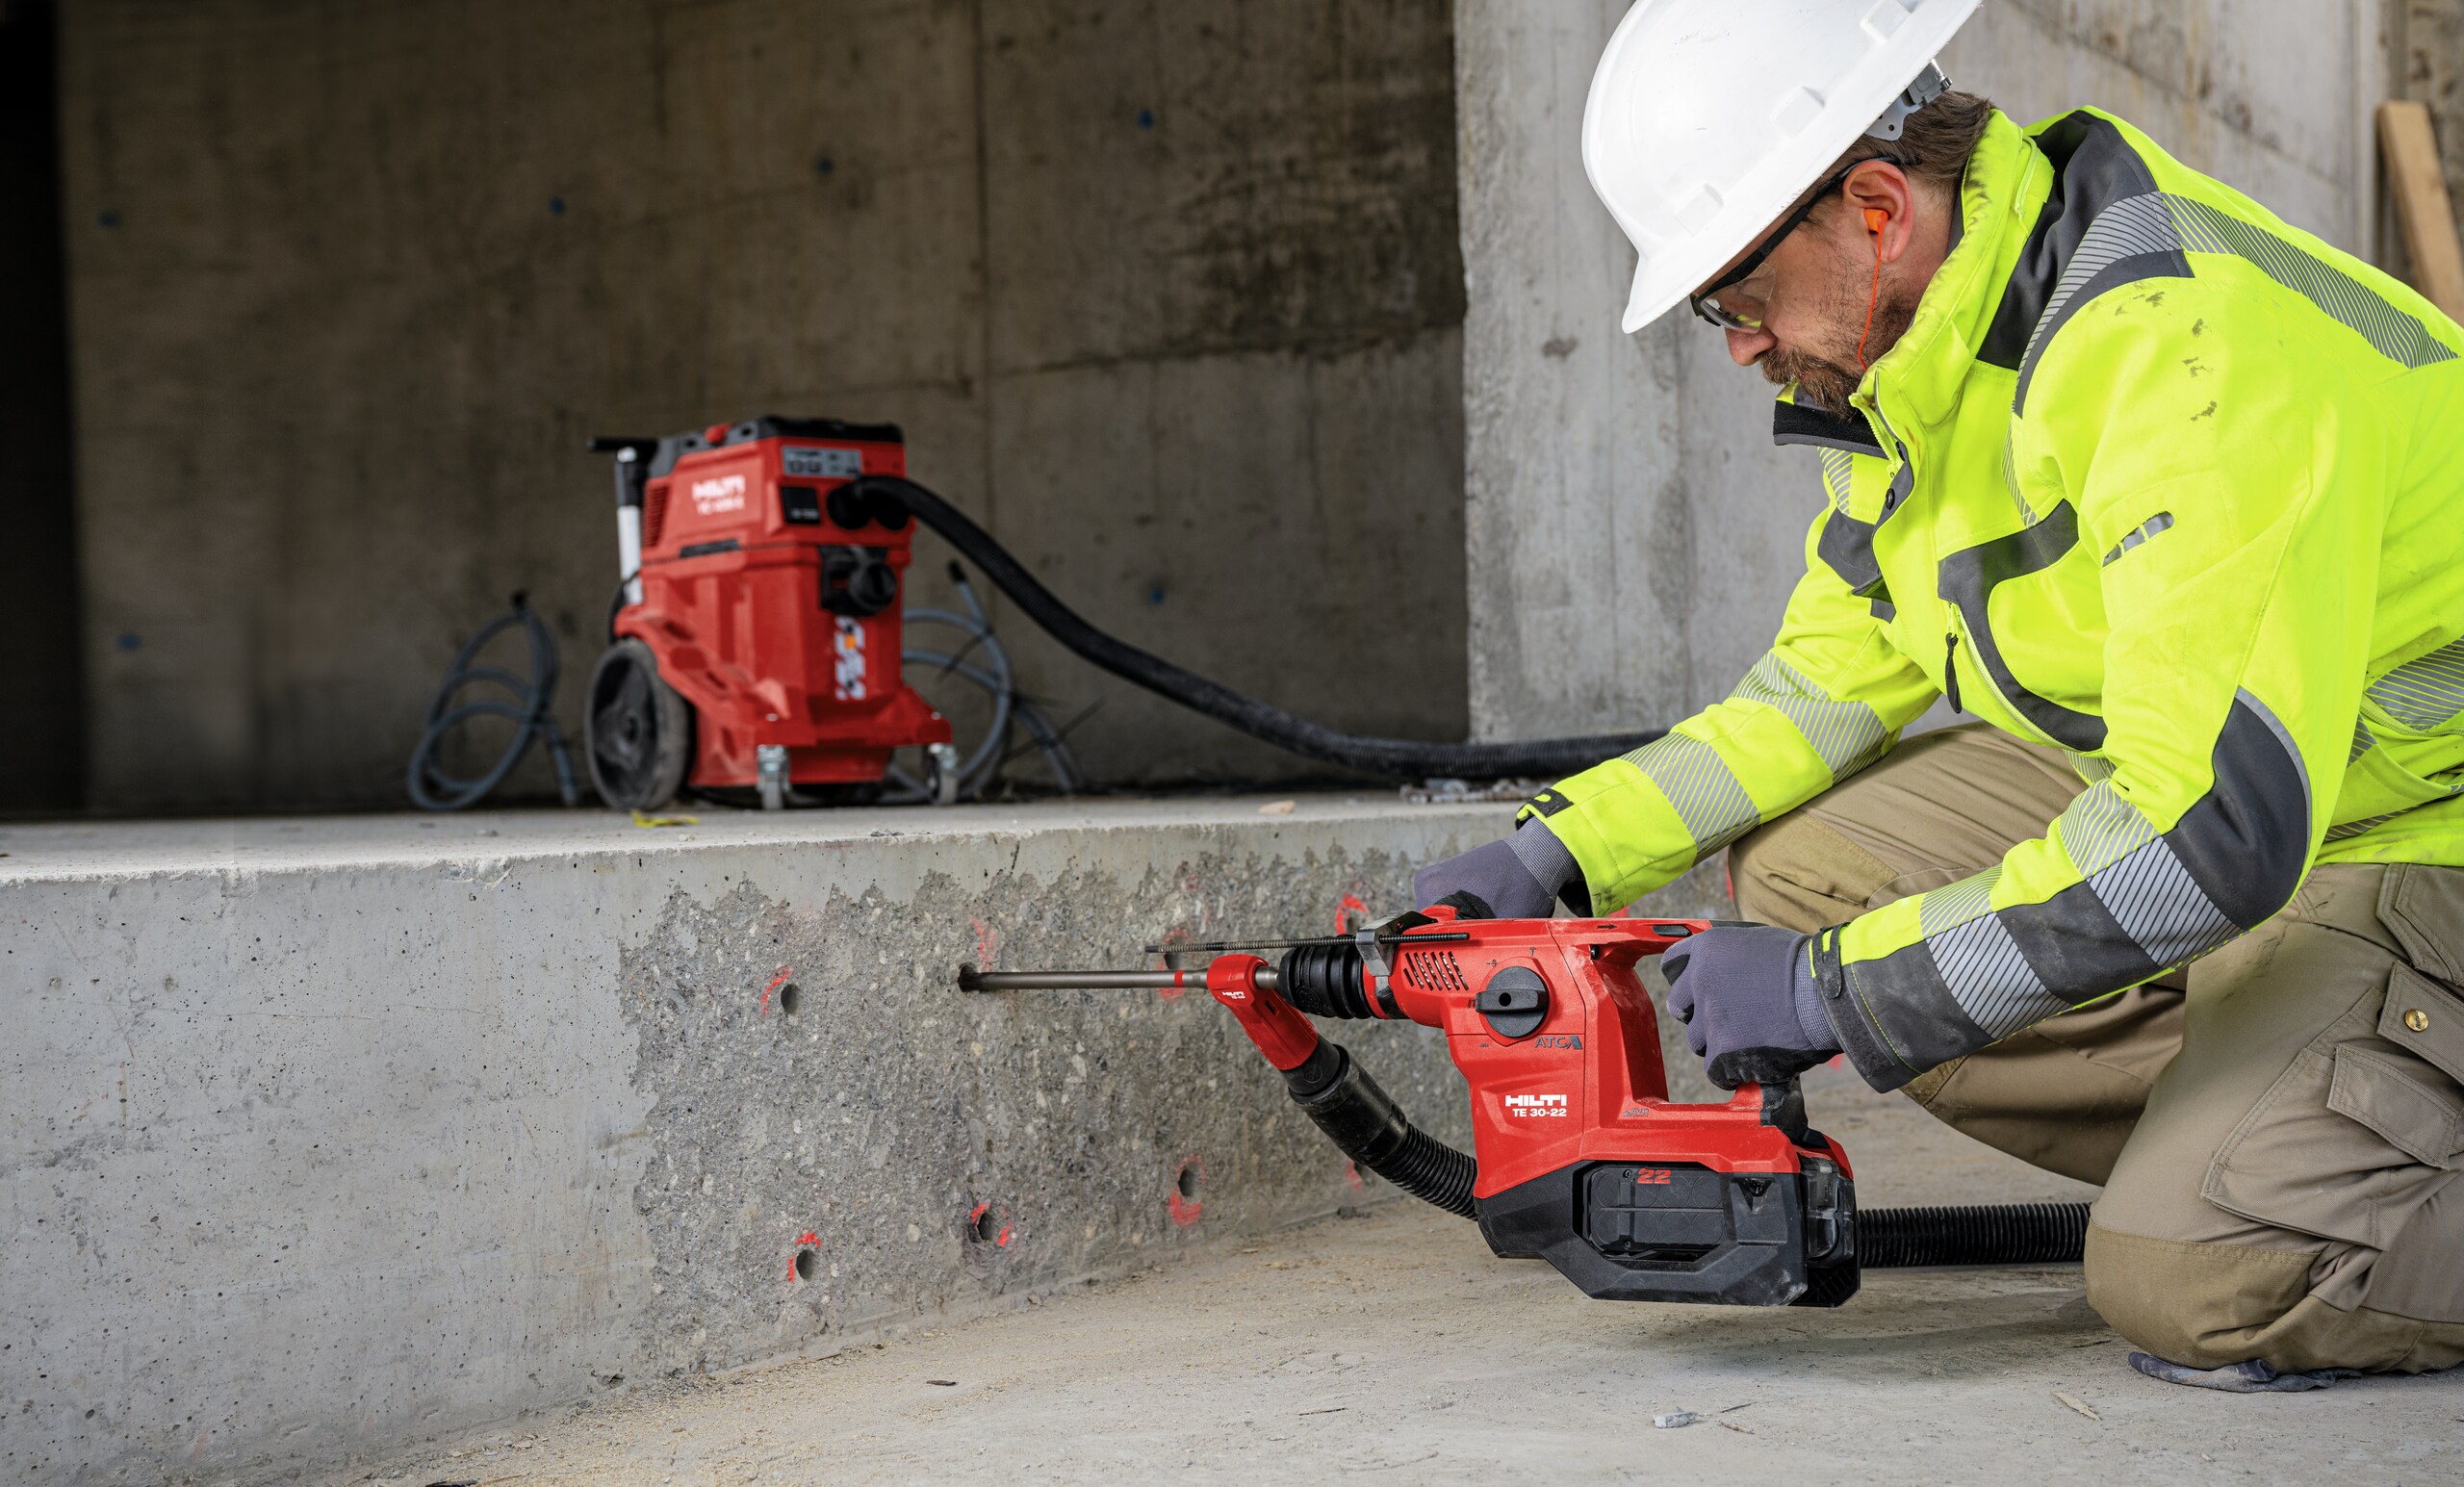 22V battery cordless SDS Max (TE-Y) rotary hammer for heavy-duty drilling and chiseling in concrete